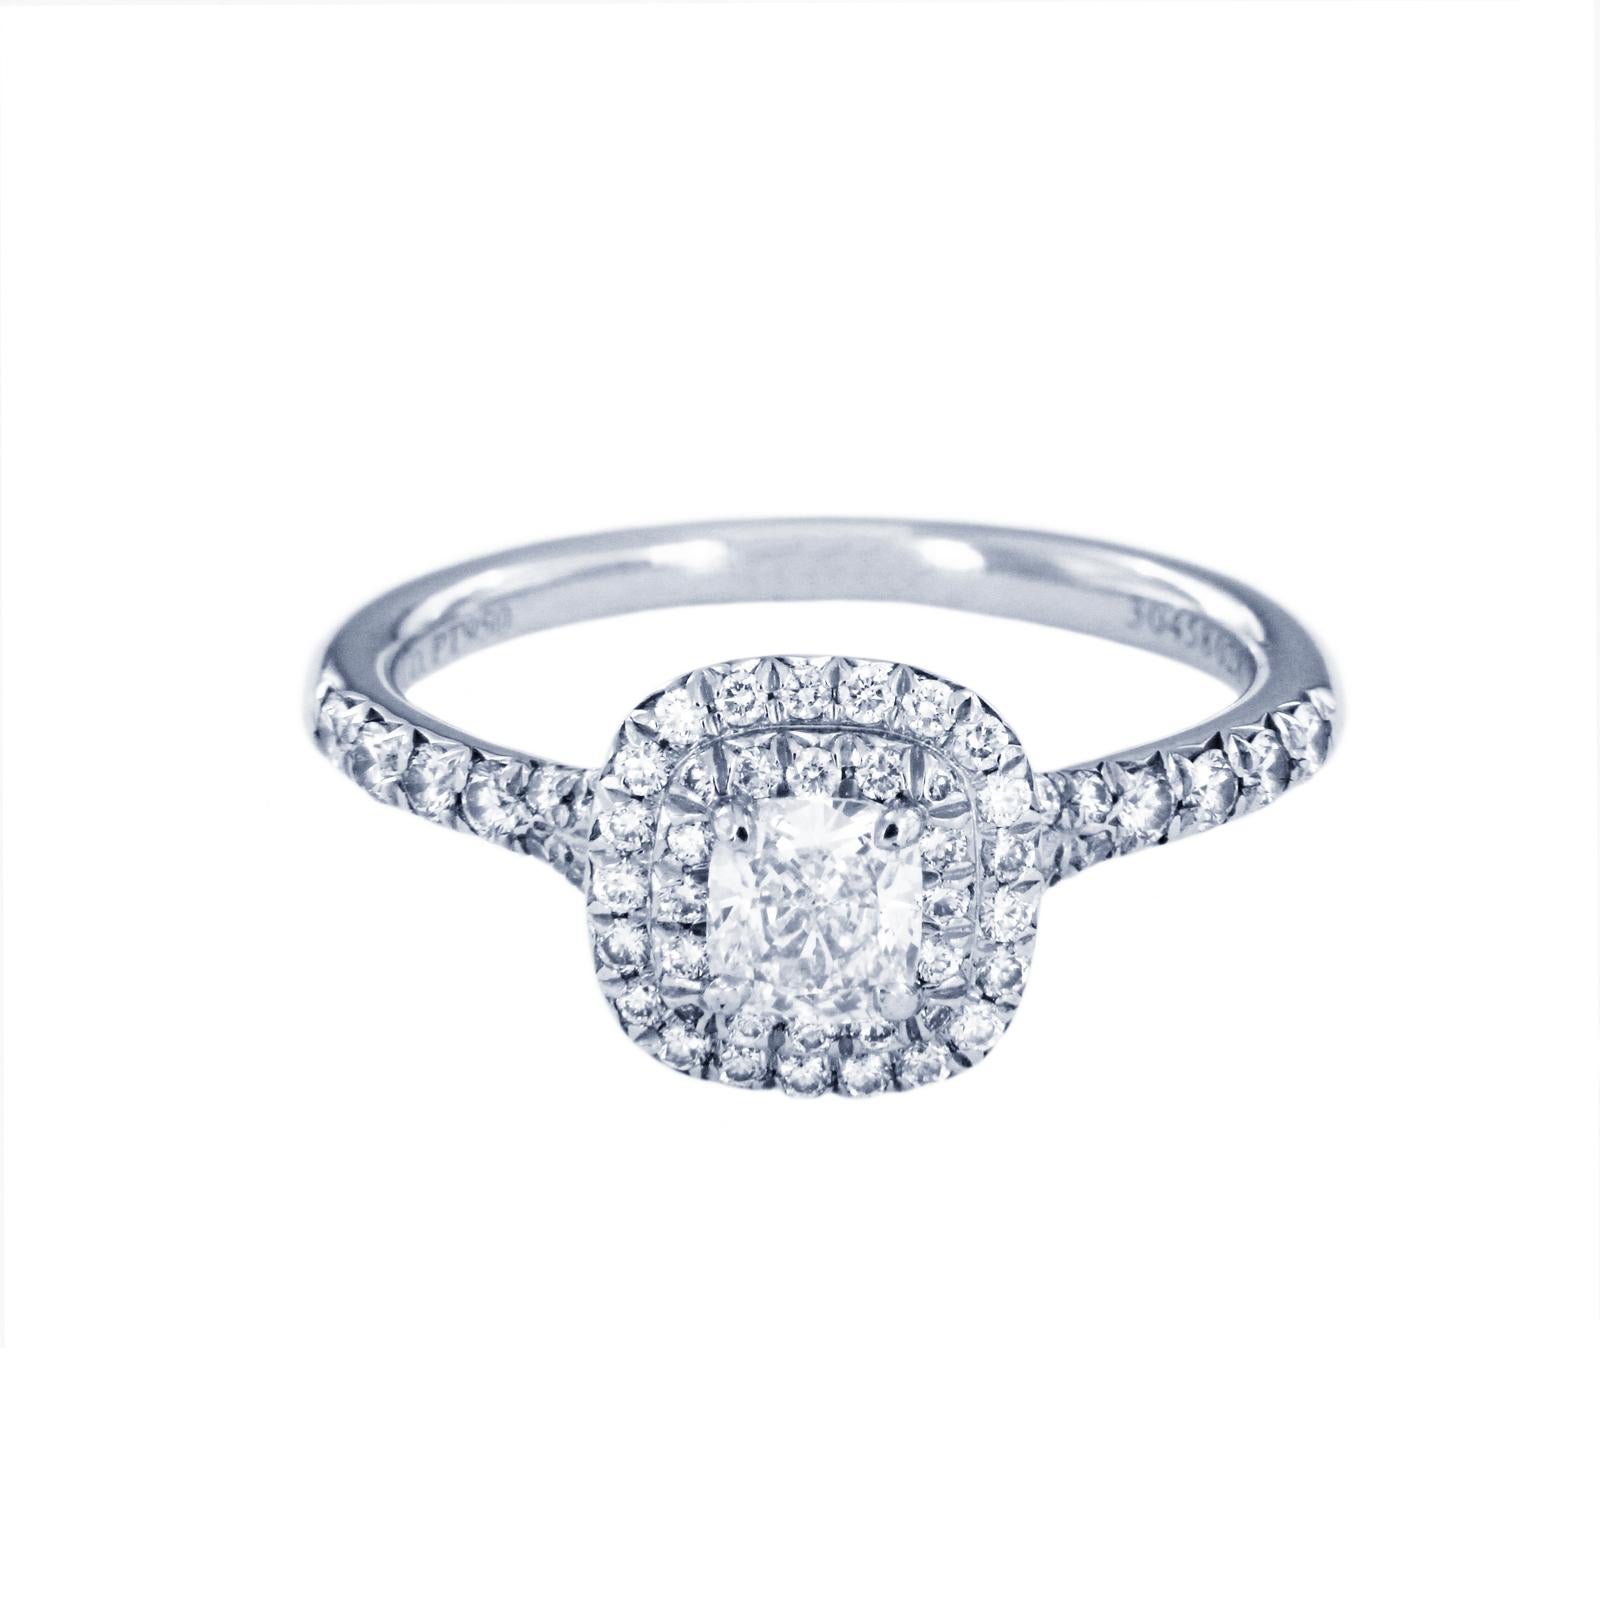 TIFFANY & CO. SOLESTE DOUBLE ROW RING IN PLATINUM

Condition: Mint 
Metal: Platinum
Ring size: 4.75
Center stone: cushion cut, 0.42 carat weight, VVS1 clarity, H color
Side stones: 0.28 carat weight, VS1-VS2 clarity, F-G color
Hallmarks: 